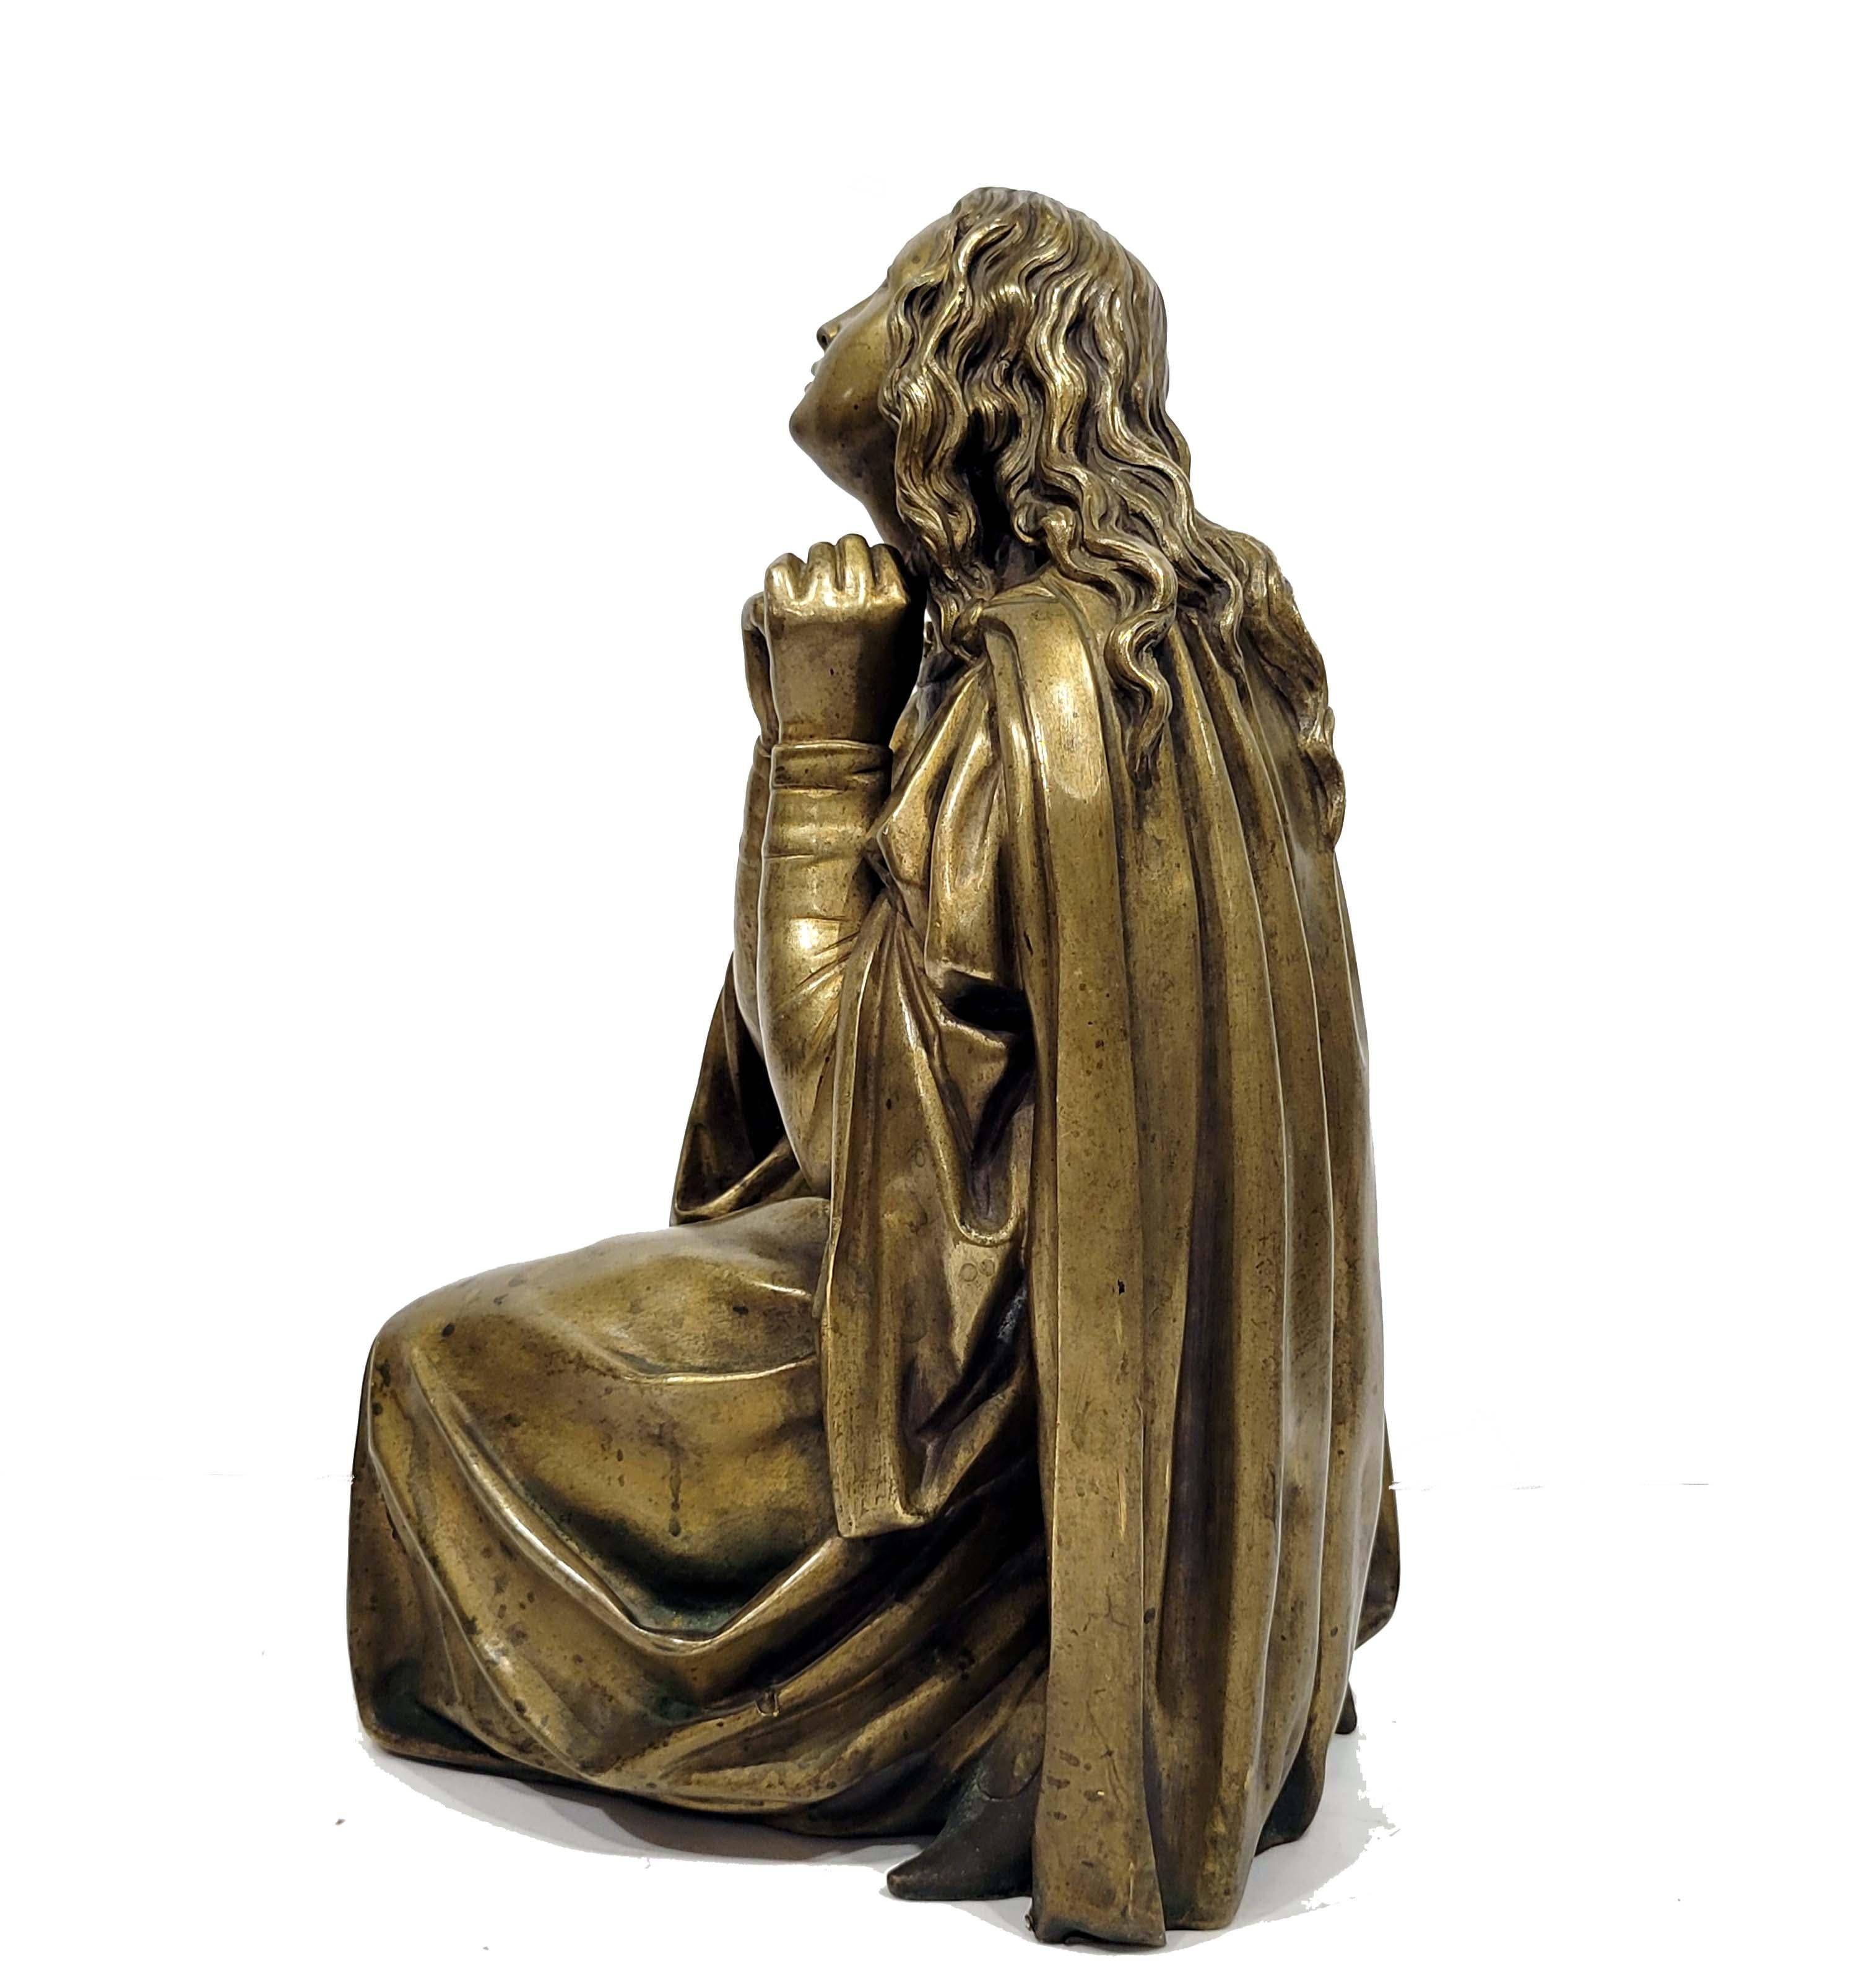 A wonderful antique bronze of Mary Magdalene, French, circa 19th century. Age patina and dark age spots visible throughout. Heavy cast bronze with wonderful chasing.
Mary Magdalene was a figure in the Bible's New Testament who was one of Jesus'